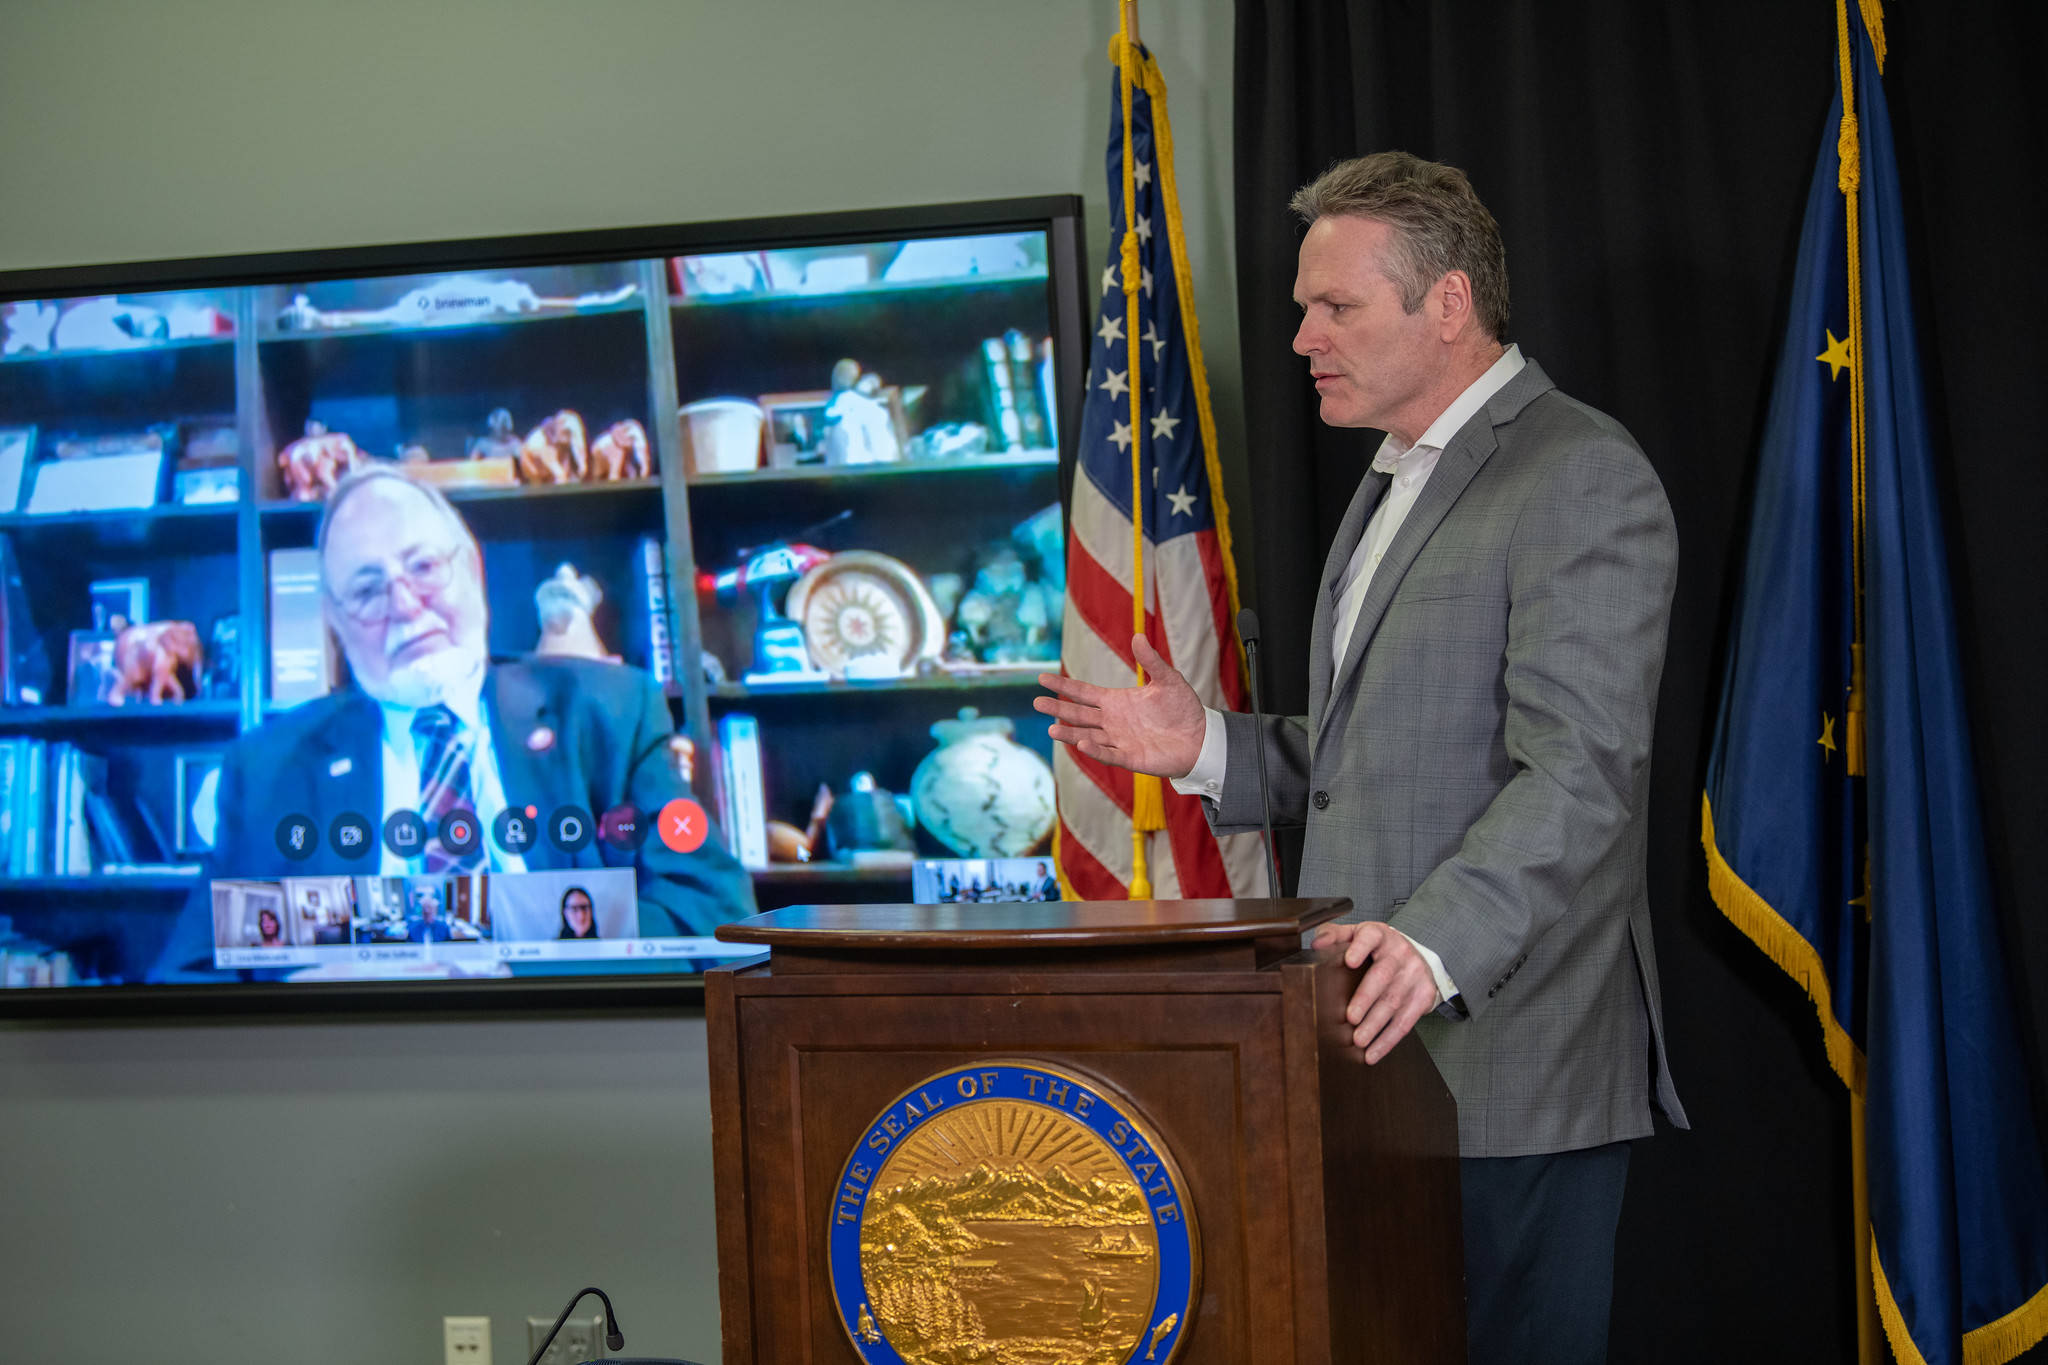 Gov. Mike Dunleavy speaks while Rep. Don Young, R-Alaska, looks on via a video feed at a press conference on March 30, 2020 in that Atwood Building in Anchorage, Alaska. (Photo courtesy Office of the Governor)